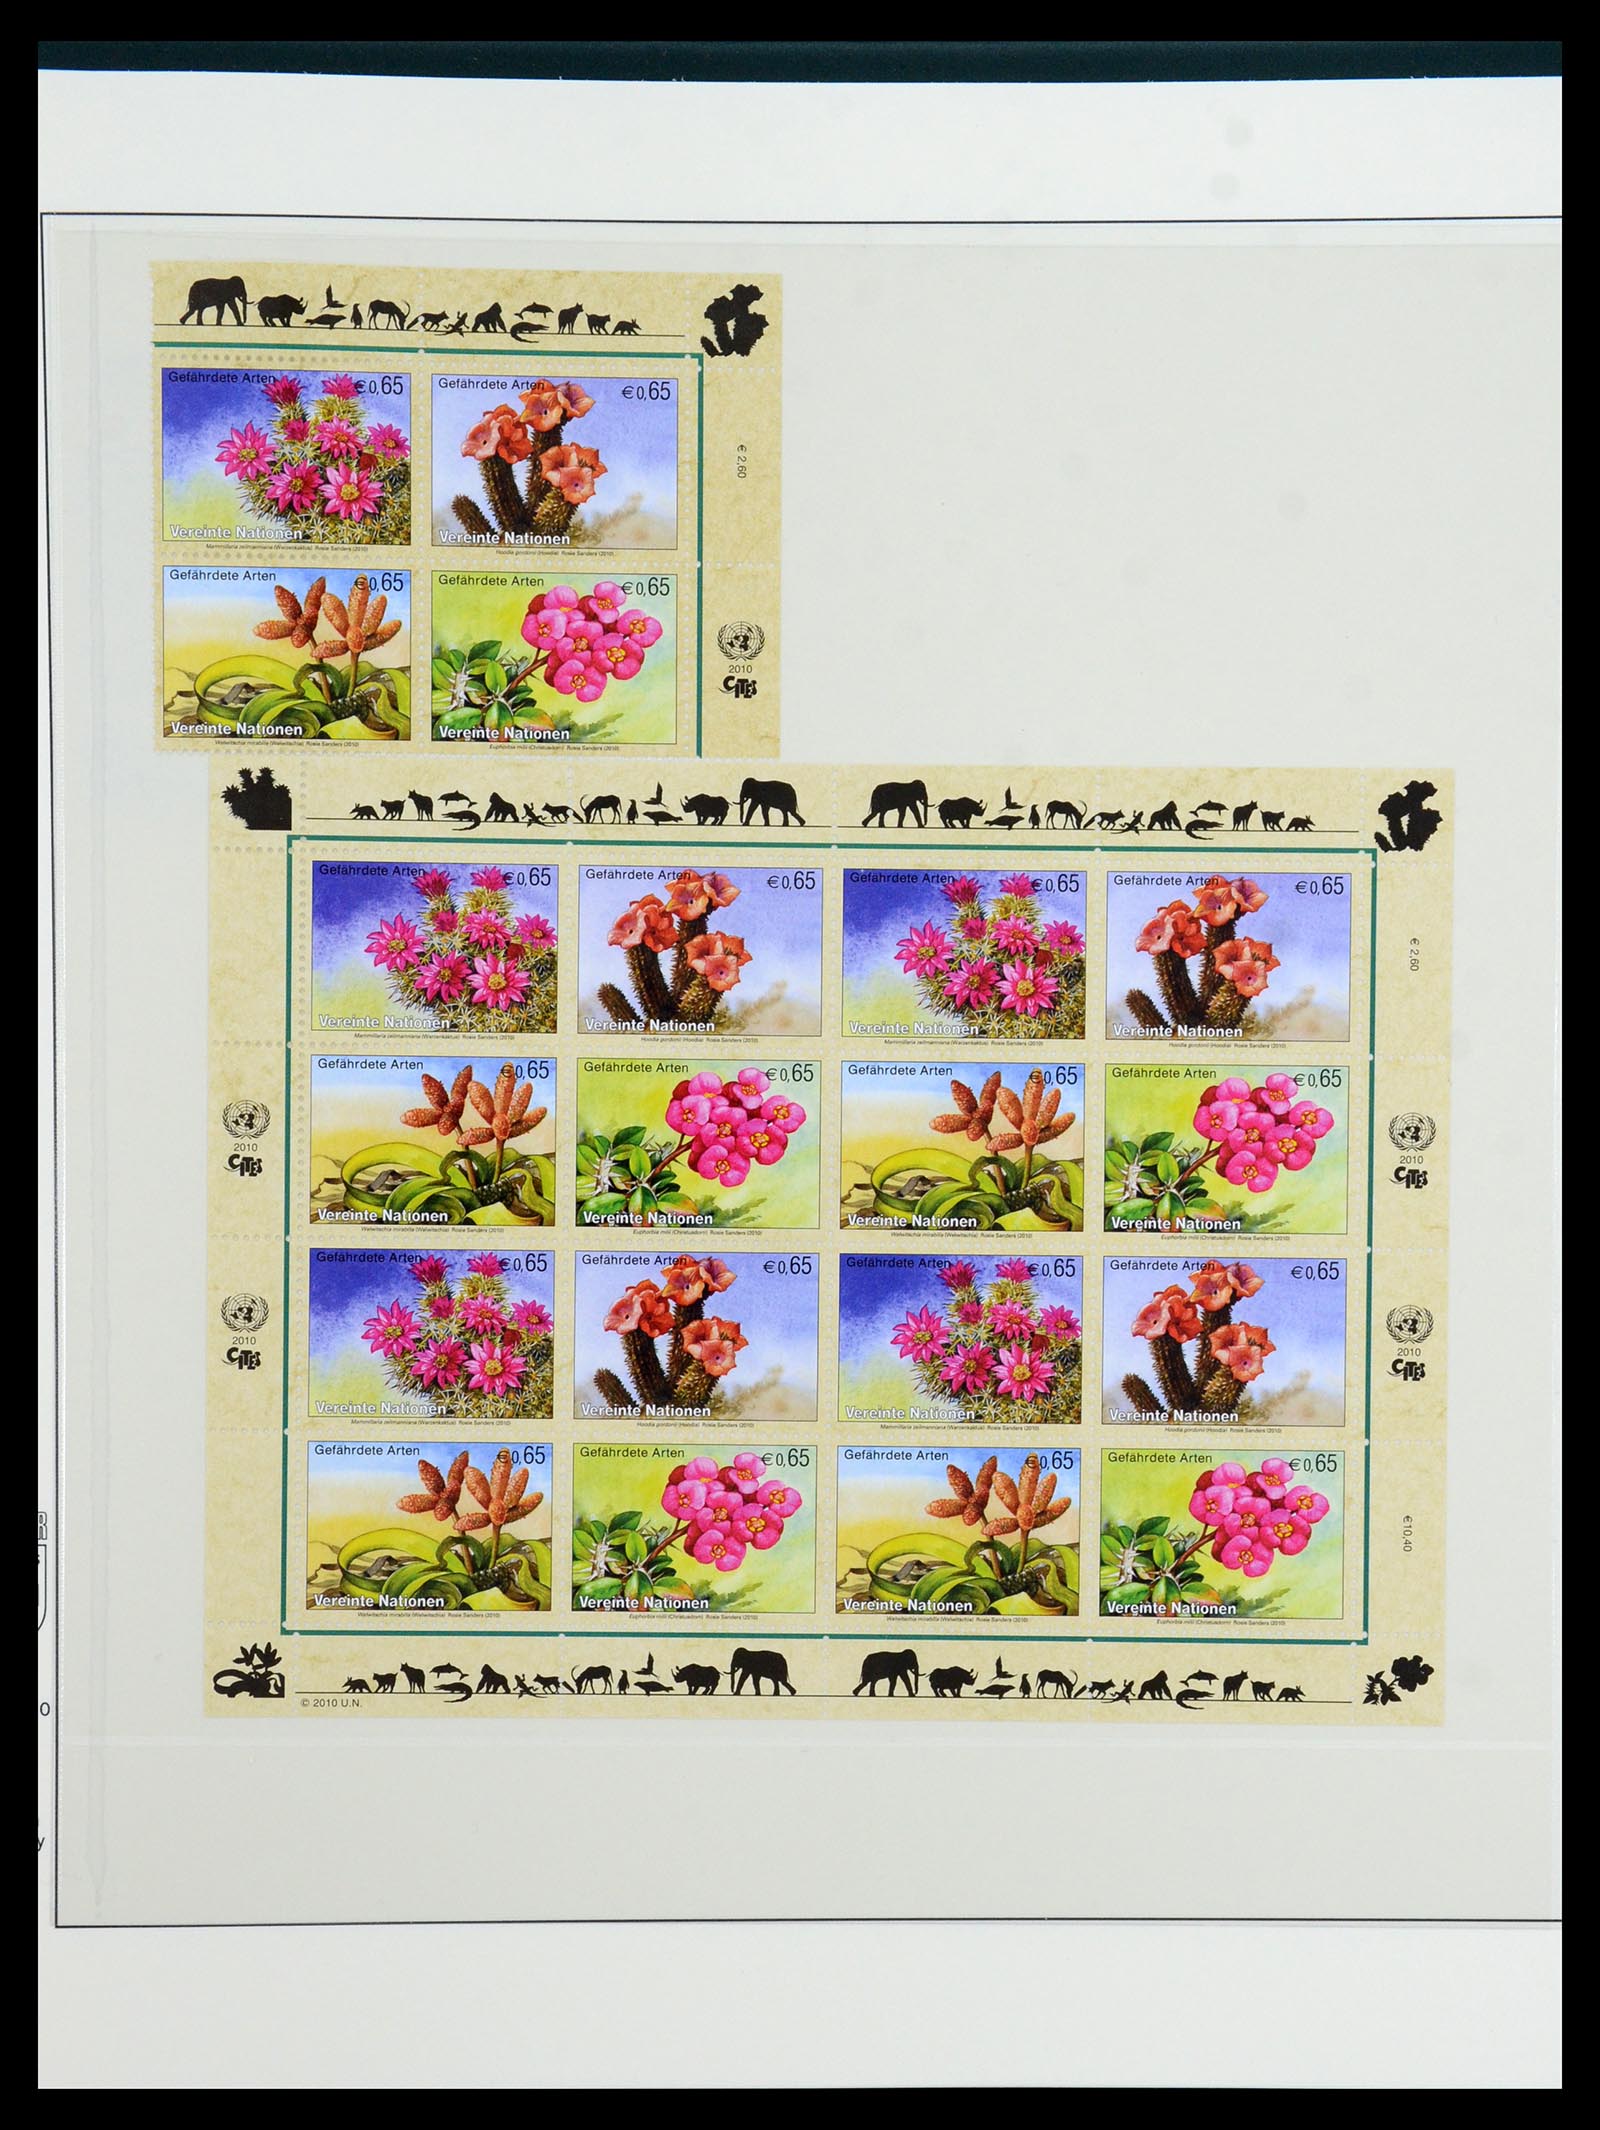 36096 054 - Stamp collection 36096 Theme cactus 1900-2015!